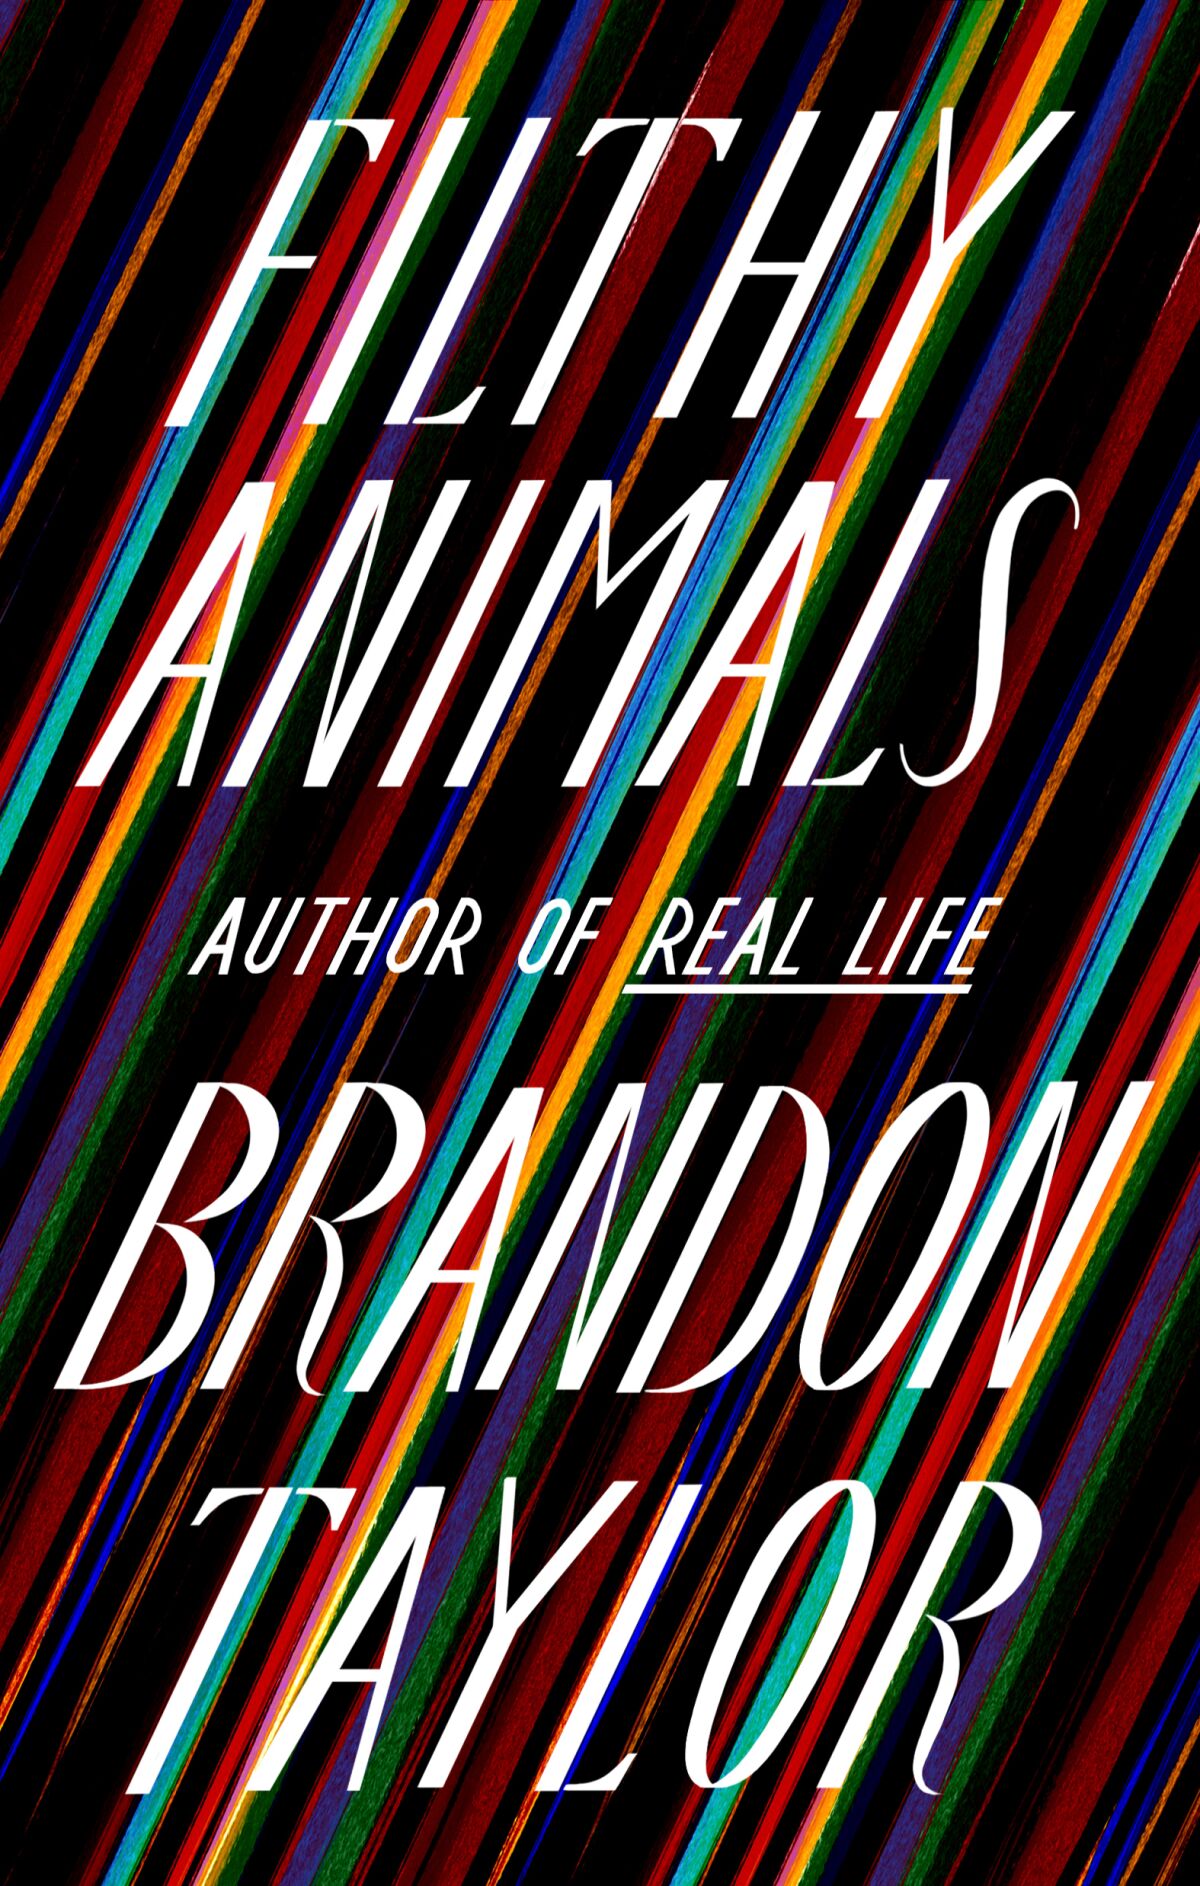 "Filthy Animals," by Brandon Taylor